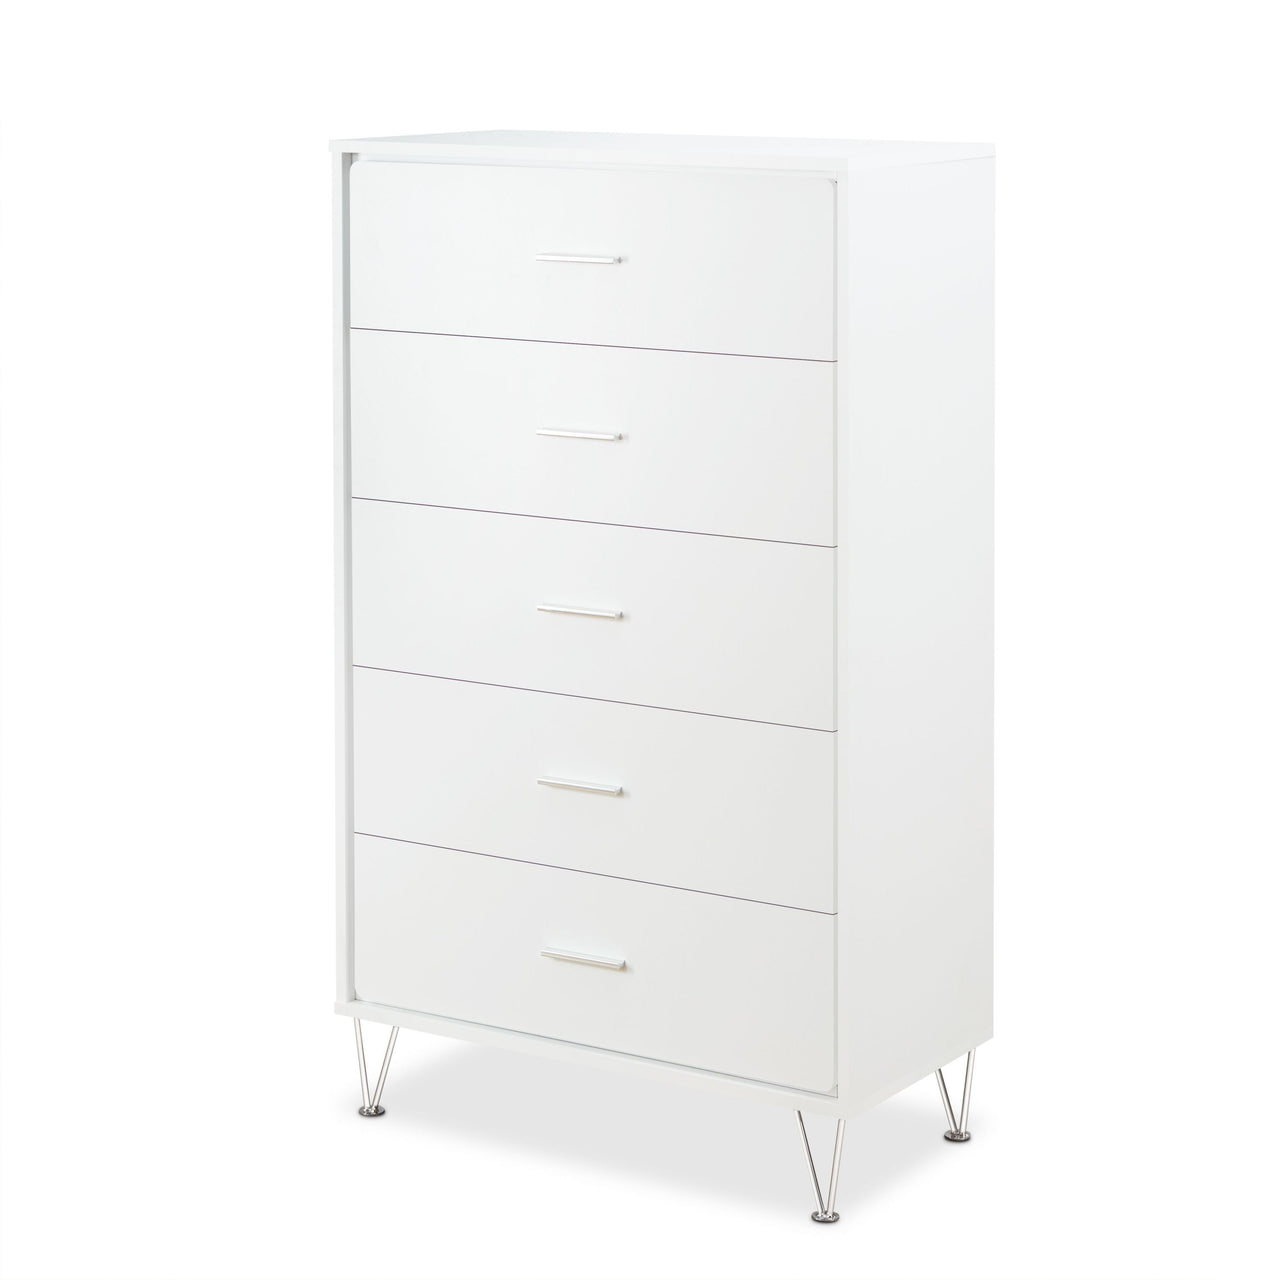 Deep chest drawers